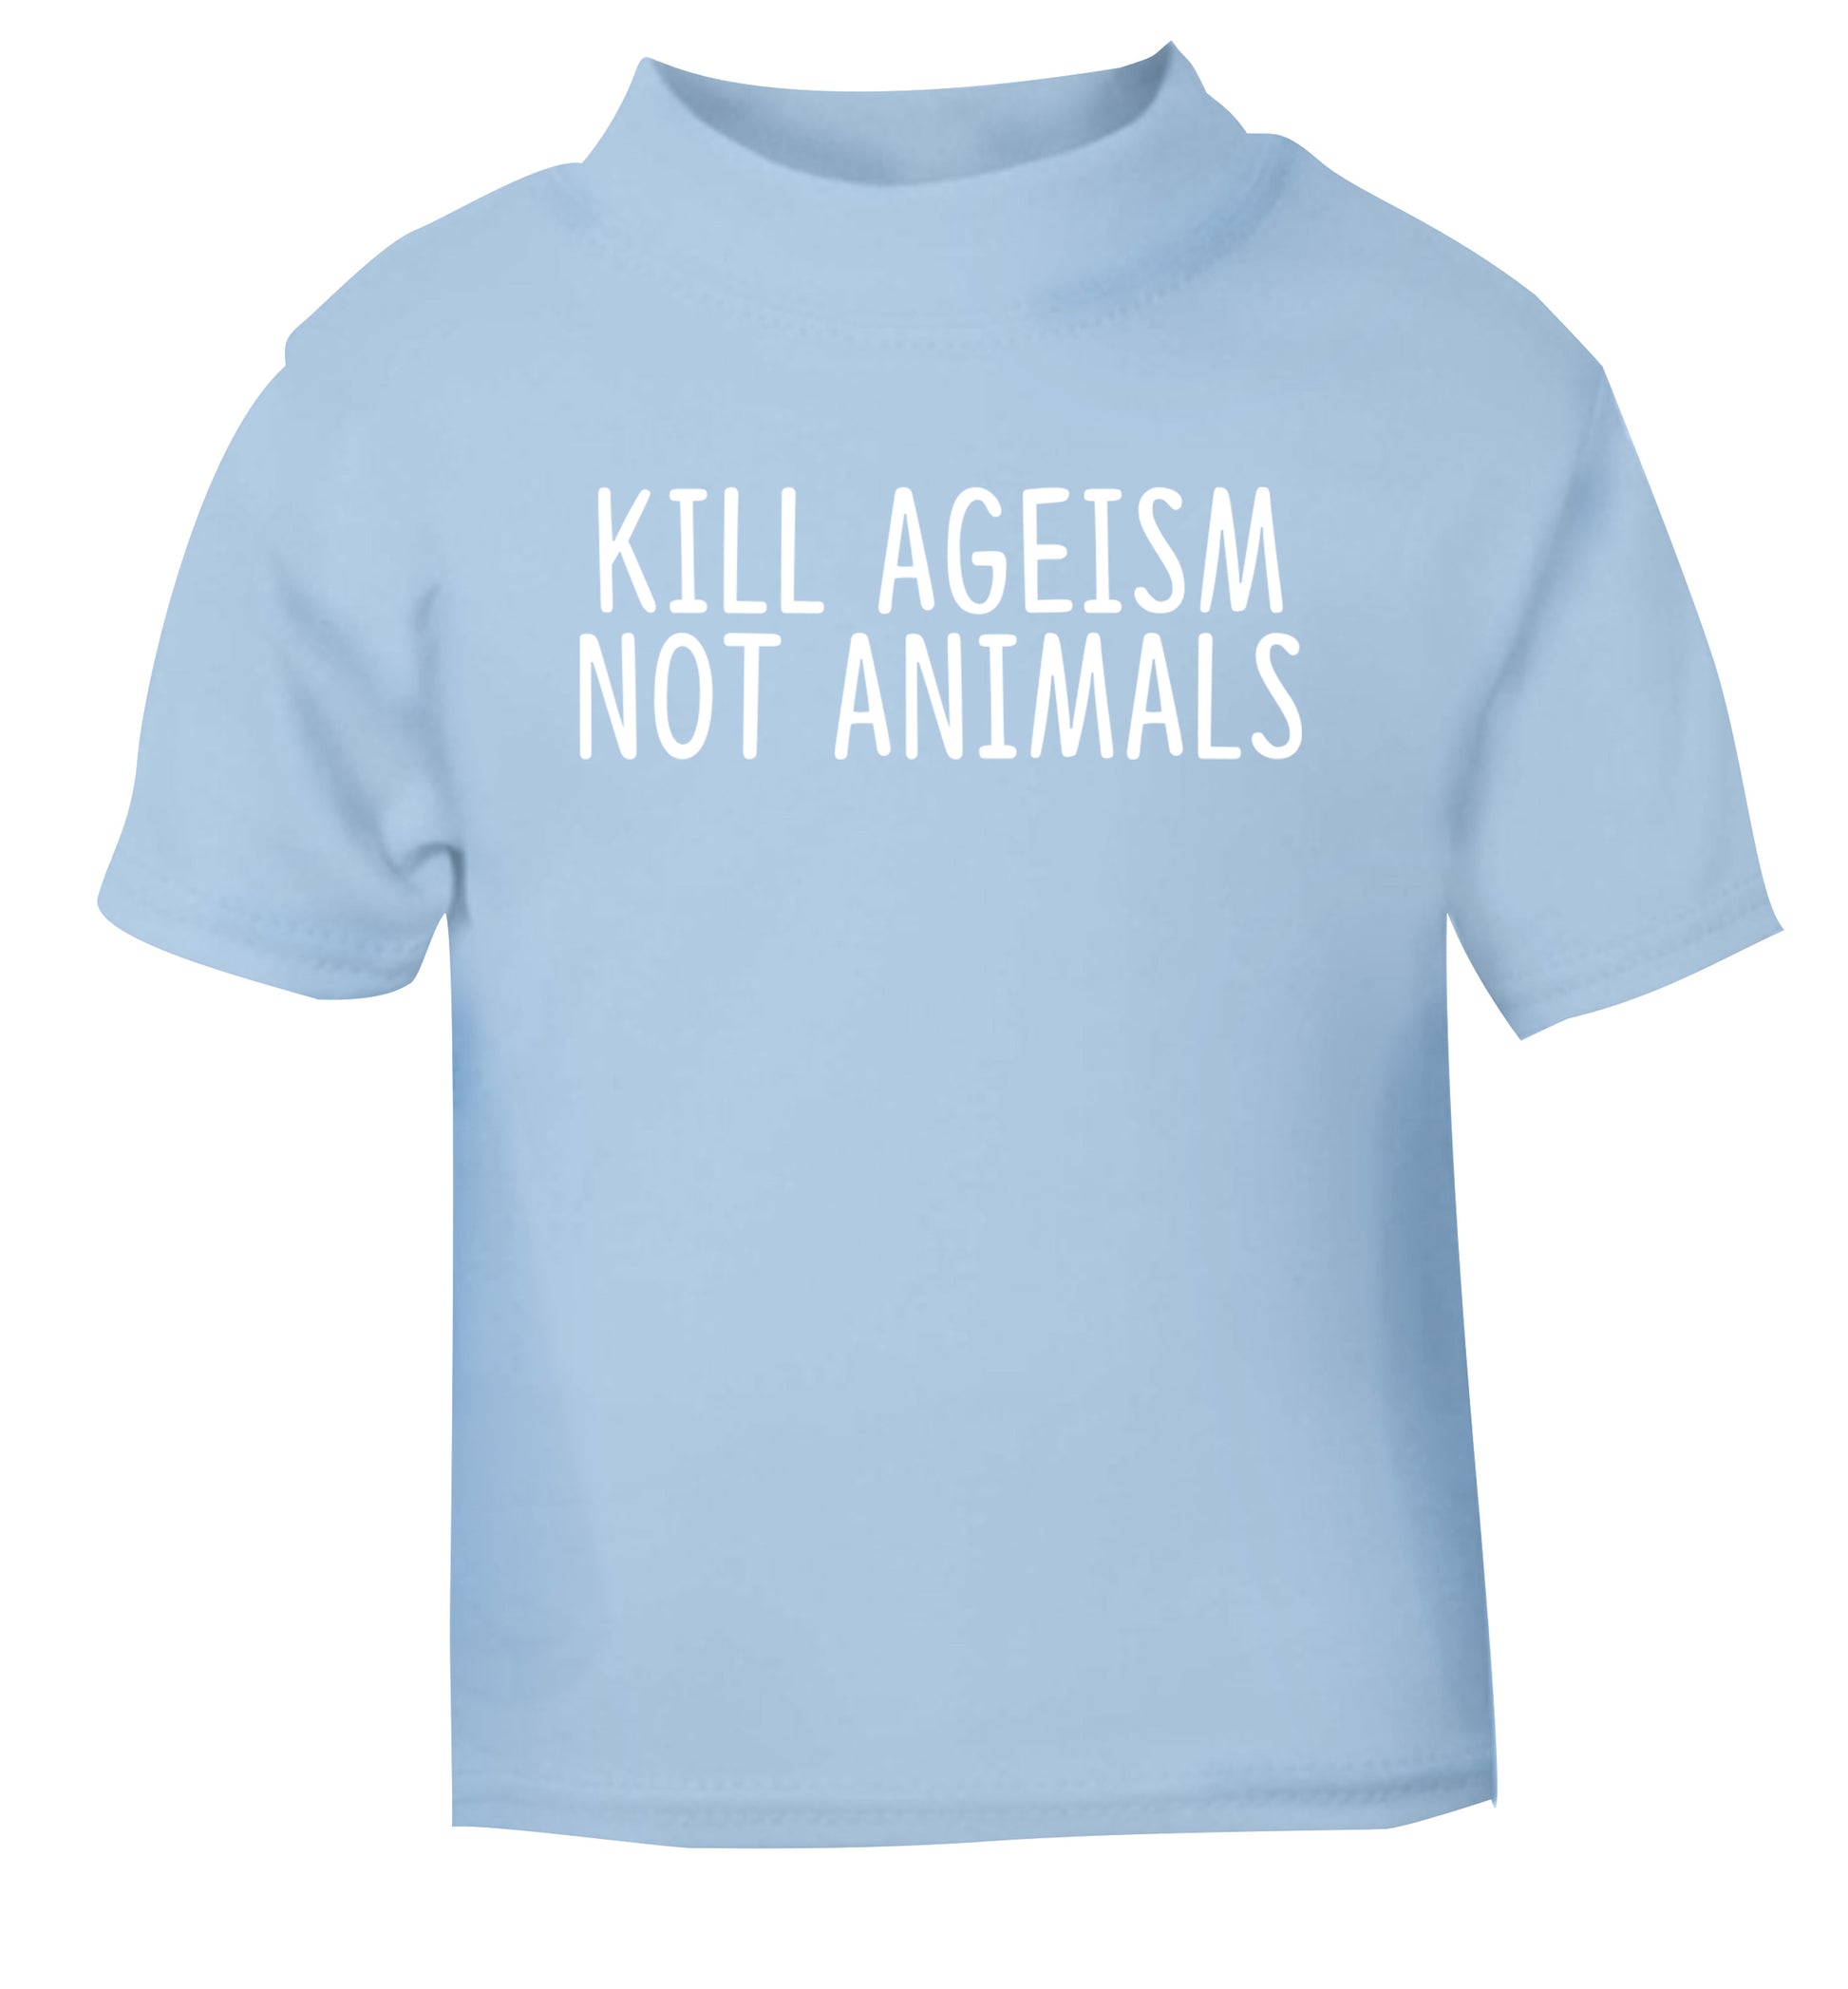 Kill Ageism Not Animals light blue Baby Toddler Tshirt 2 Years